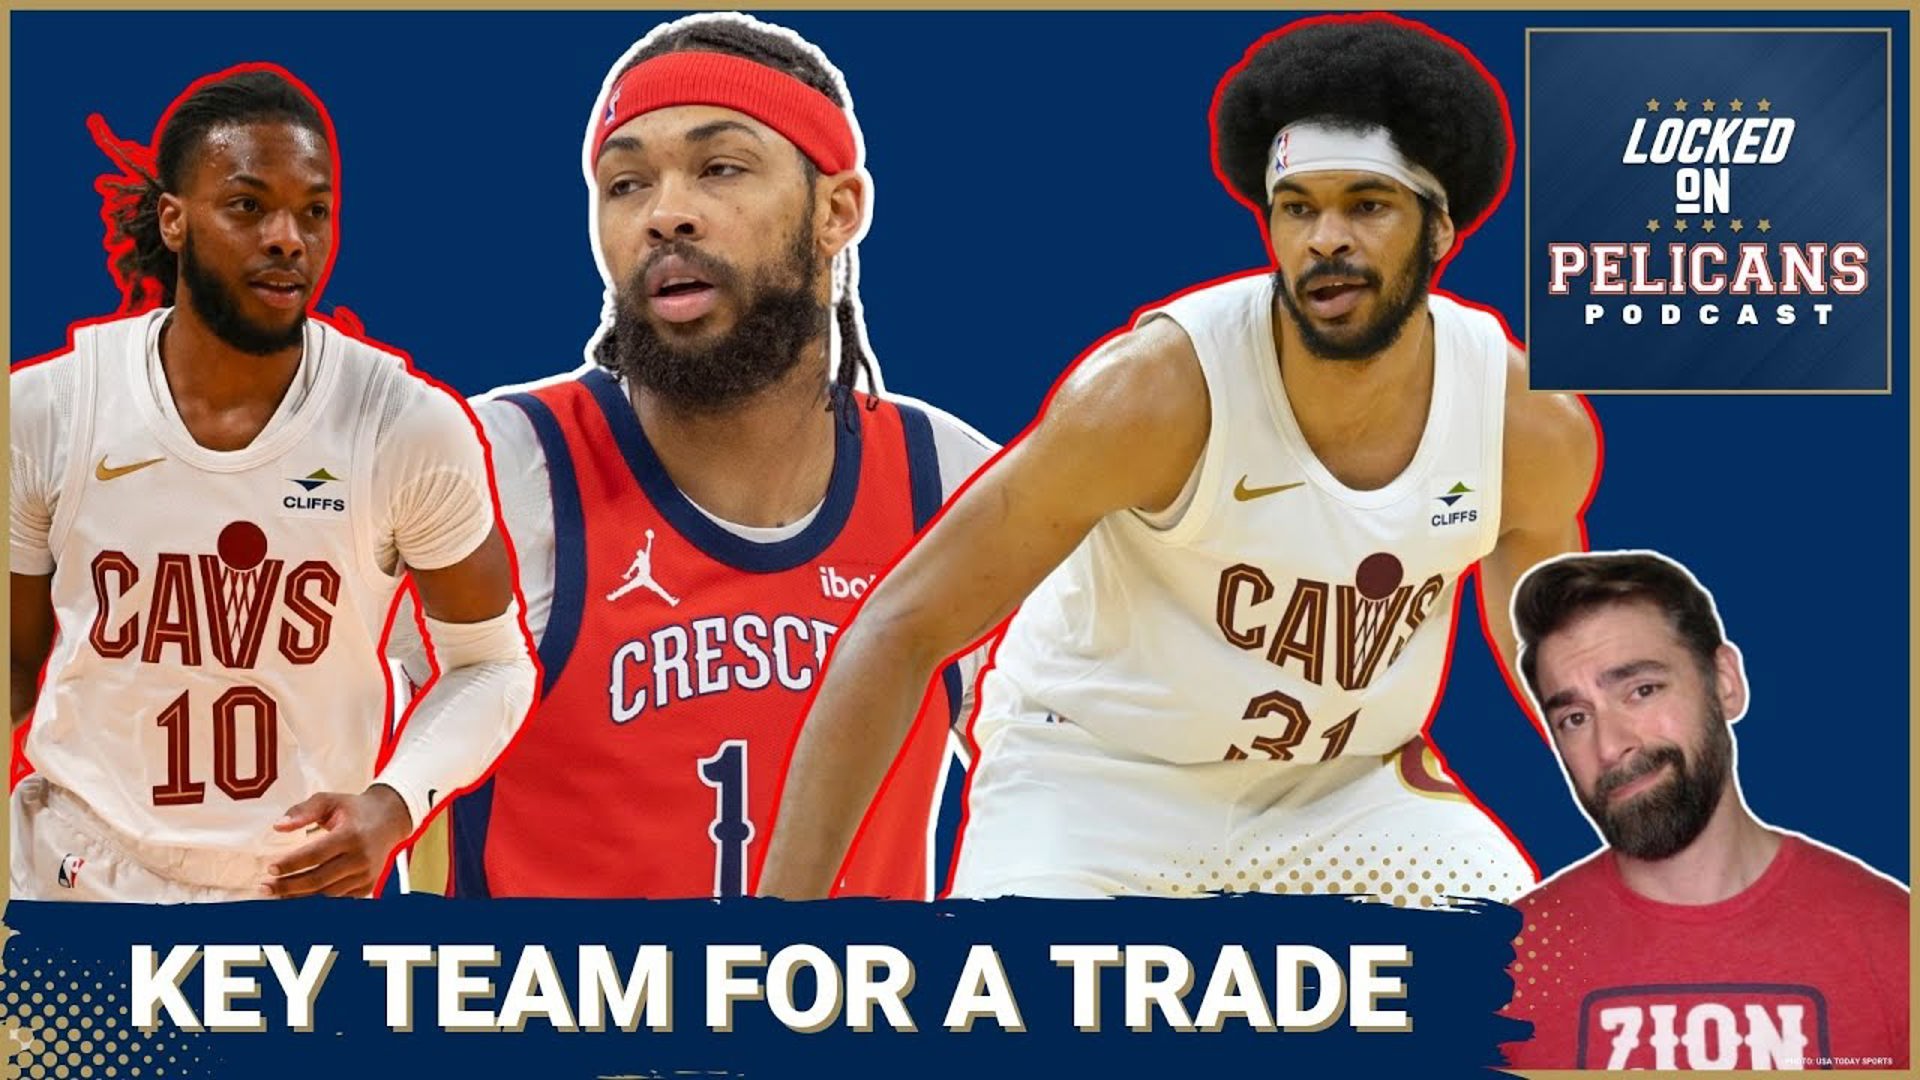 If the New Orleans Pelicans want to get a trade done quickly around Brandon Ingram the Cleveland Cavaliers are the key team.